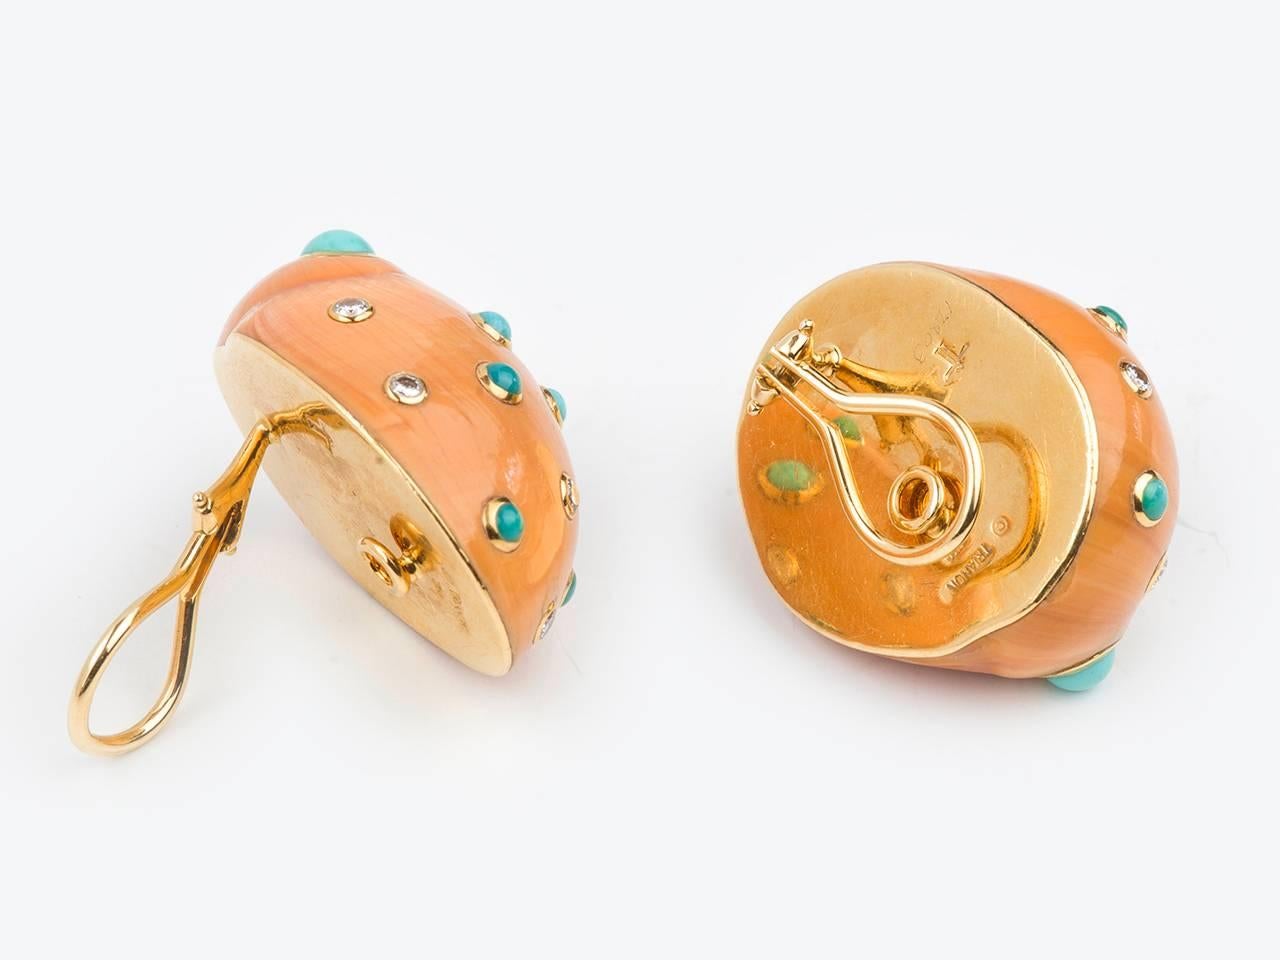 18k gold Shell Earclips, studded with diamonds and turquoise. Signed TRIANON 750.


